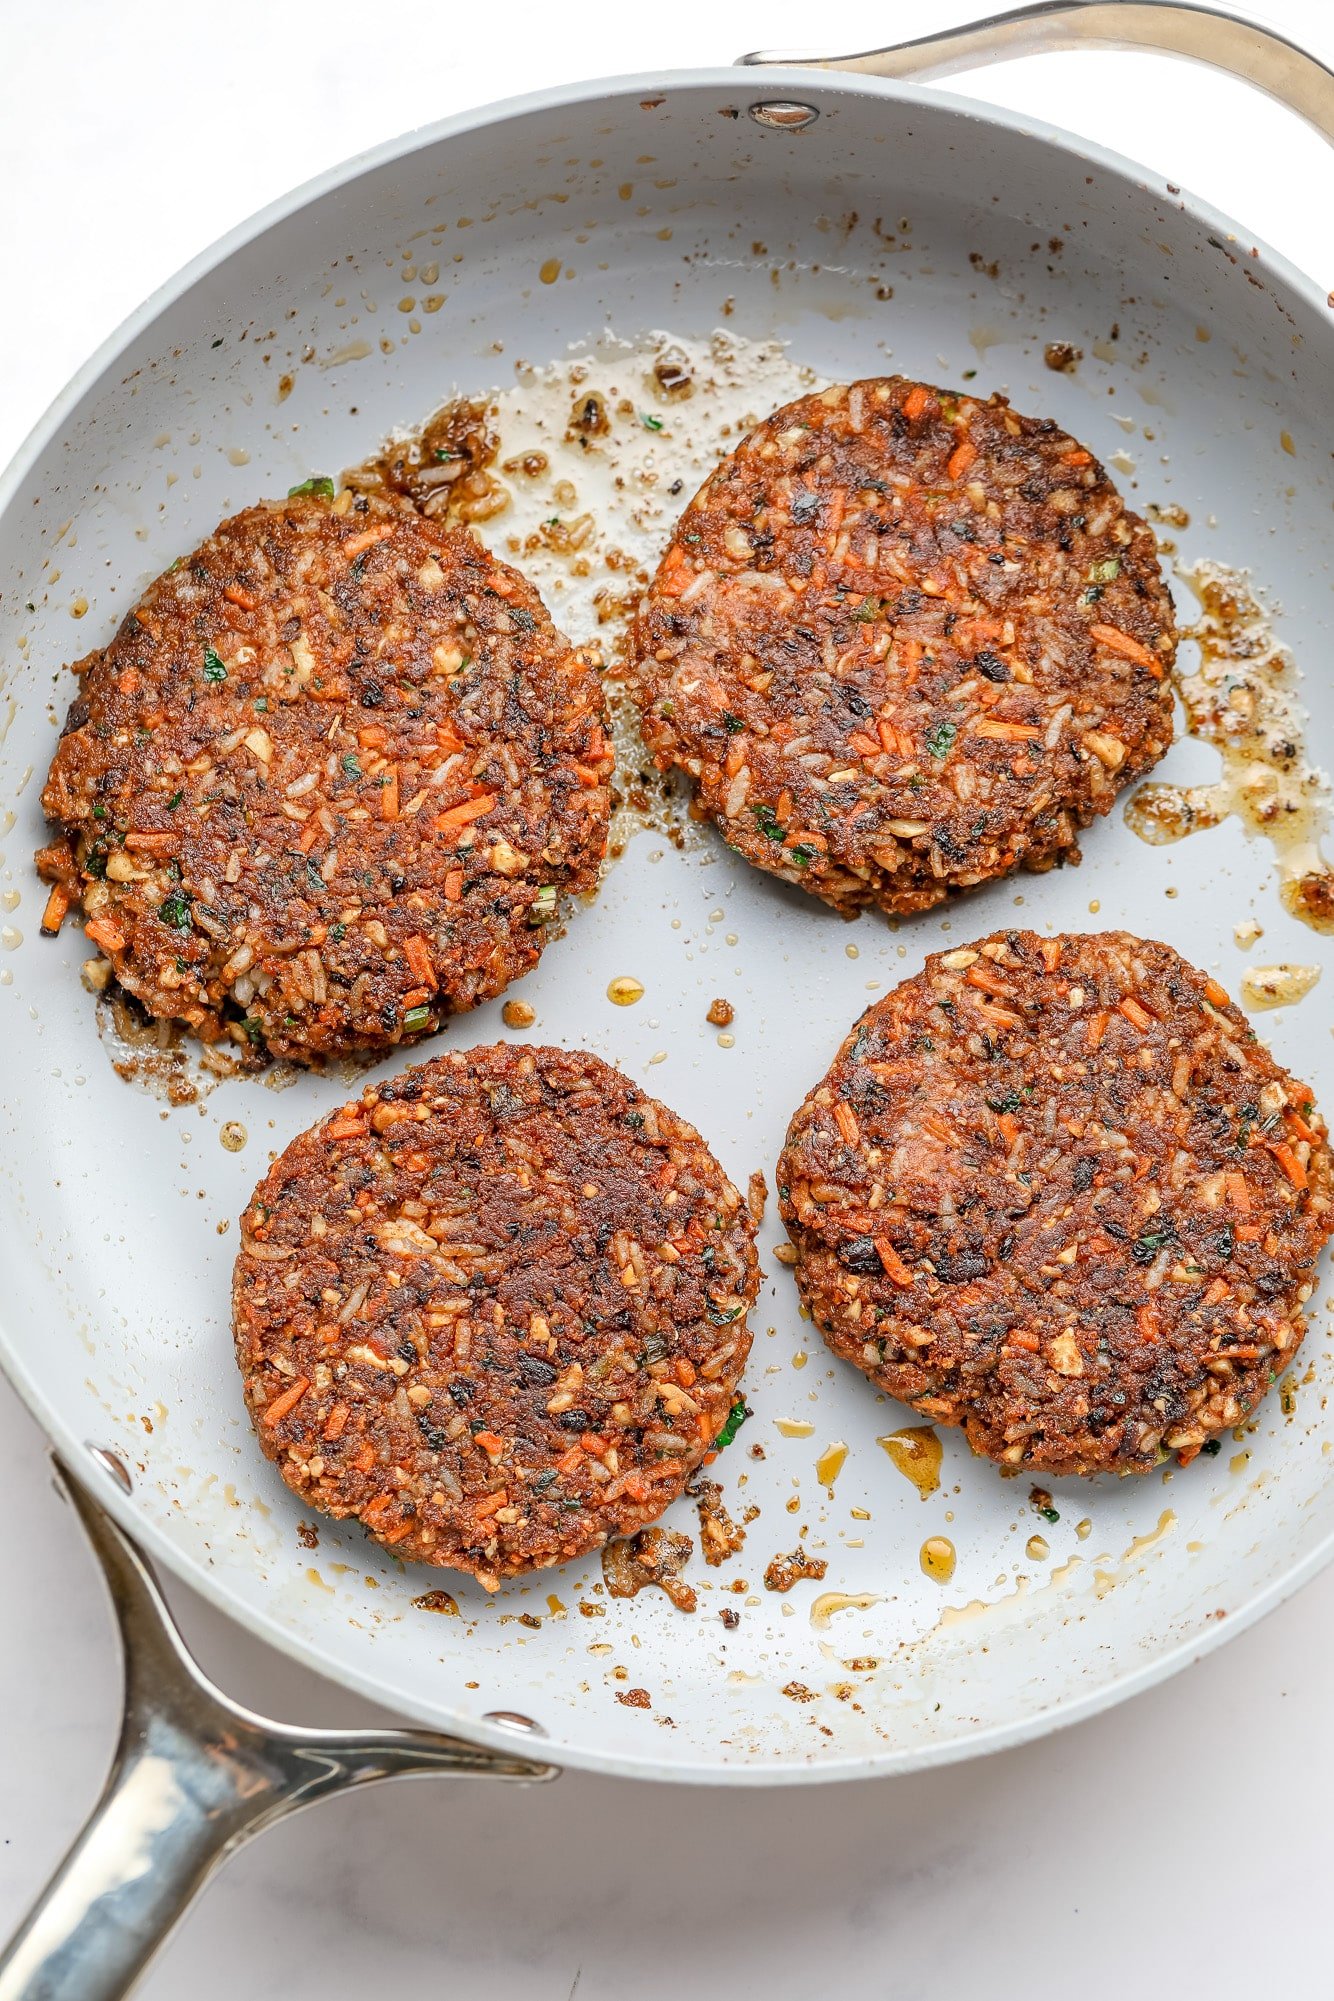 4 veggie burgers cooking in a large skillet.